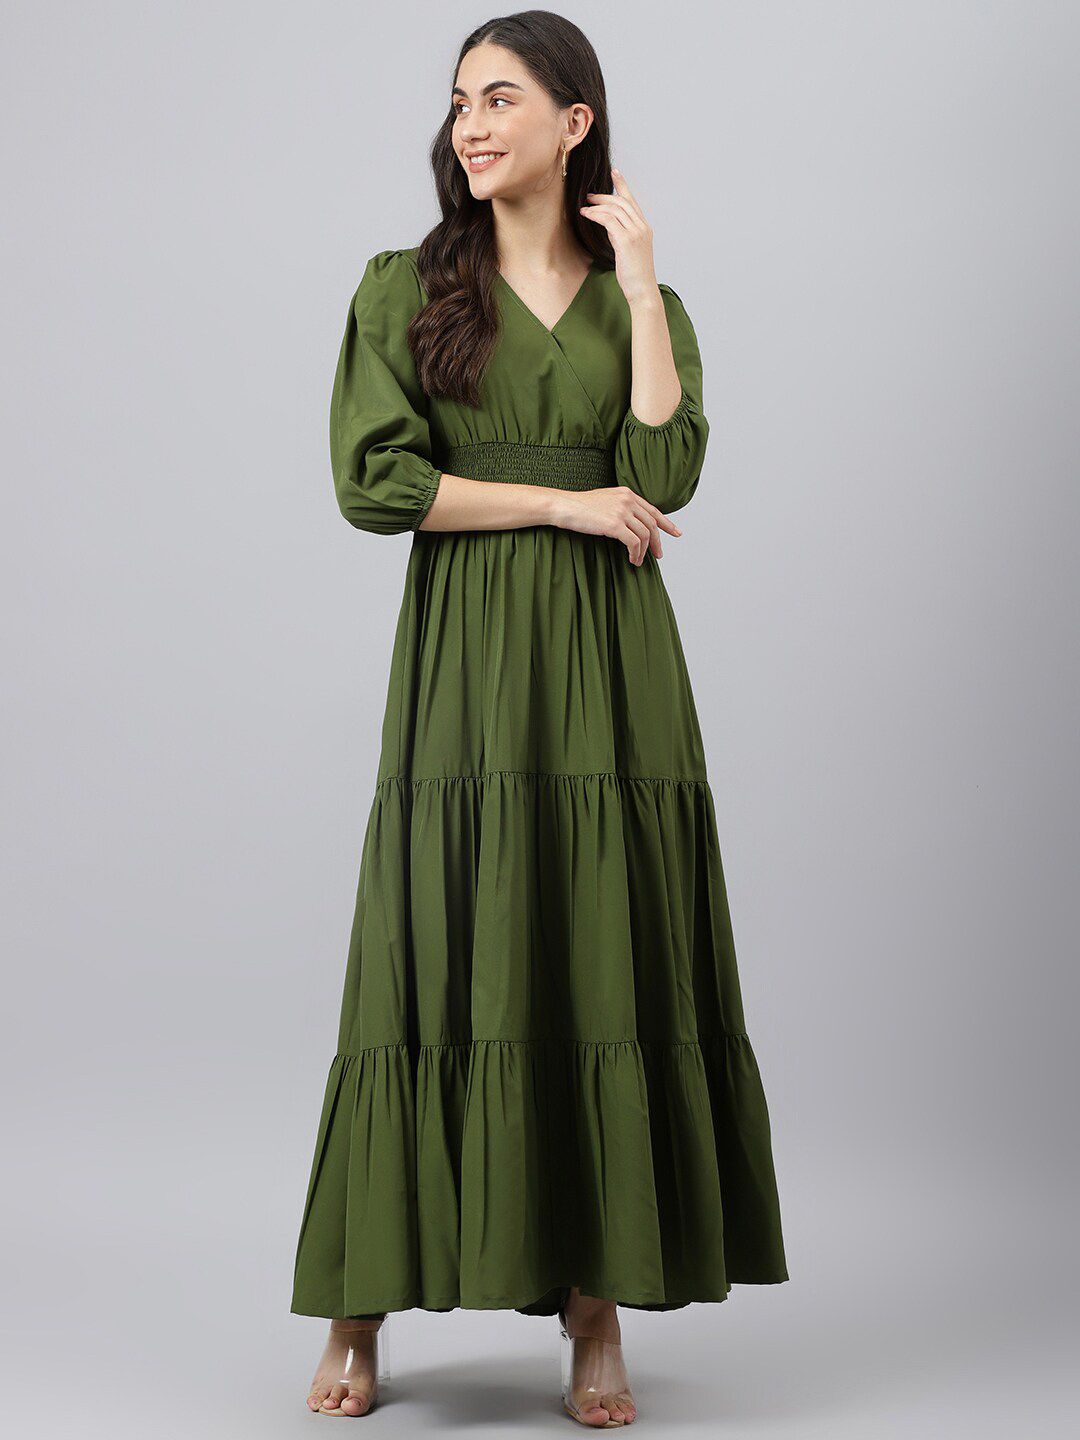 DEEBACO Olive Green Tiered Wrap Style Maxi Dress Price in India